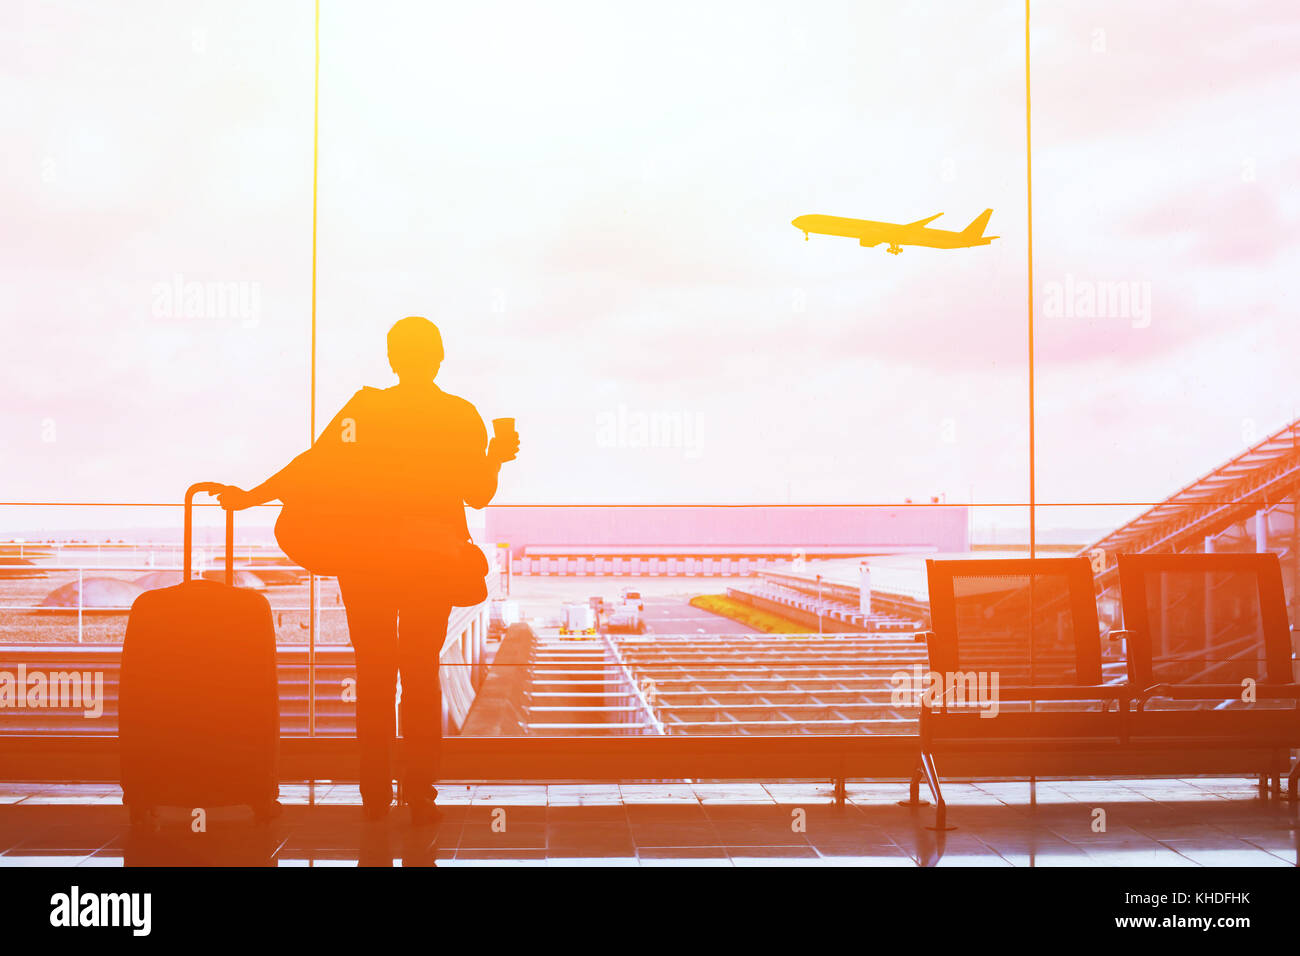 people in airport waiting for departure, silhouette of woman passenger traveling with luggage Stock Photo